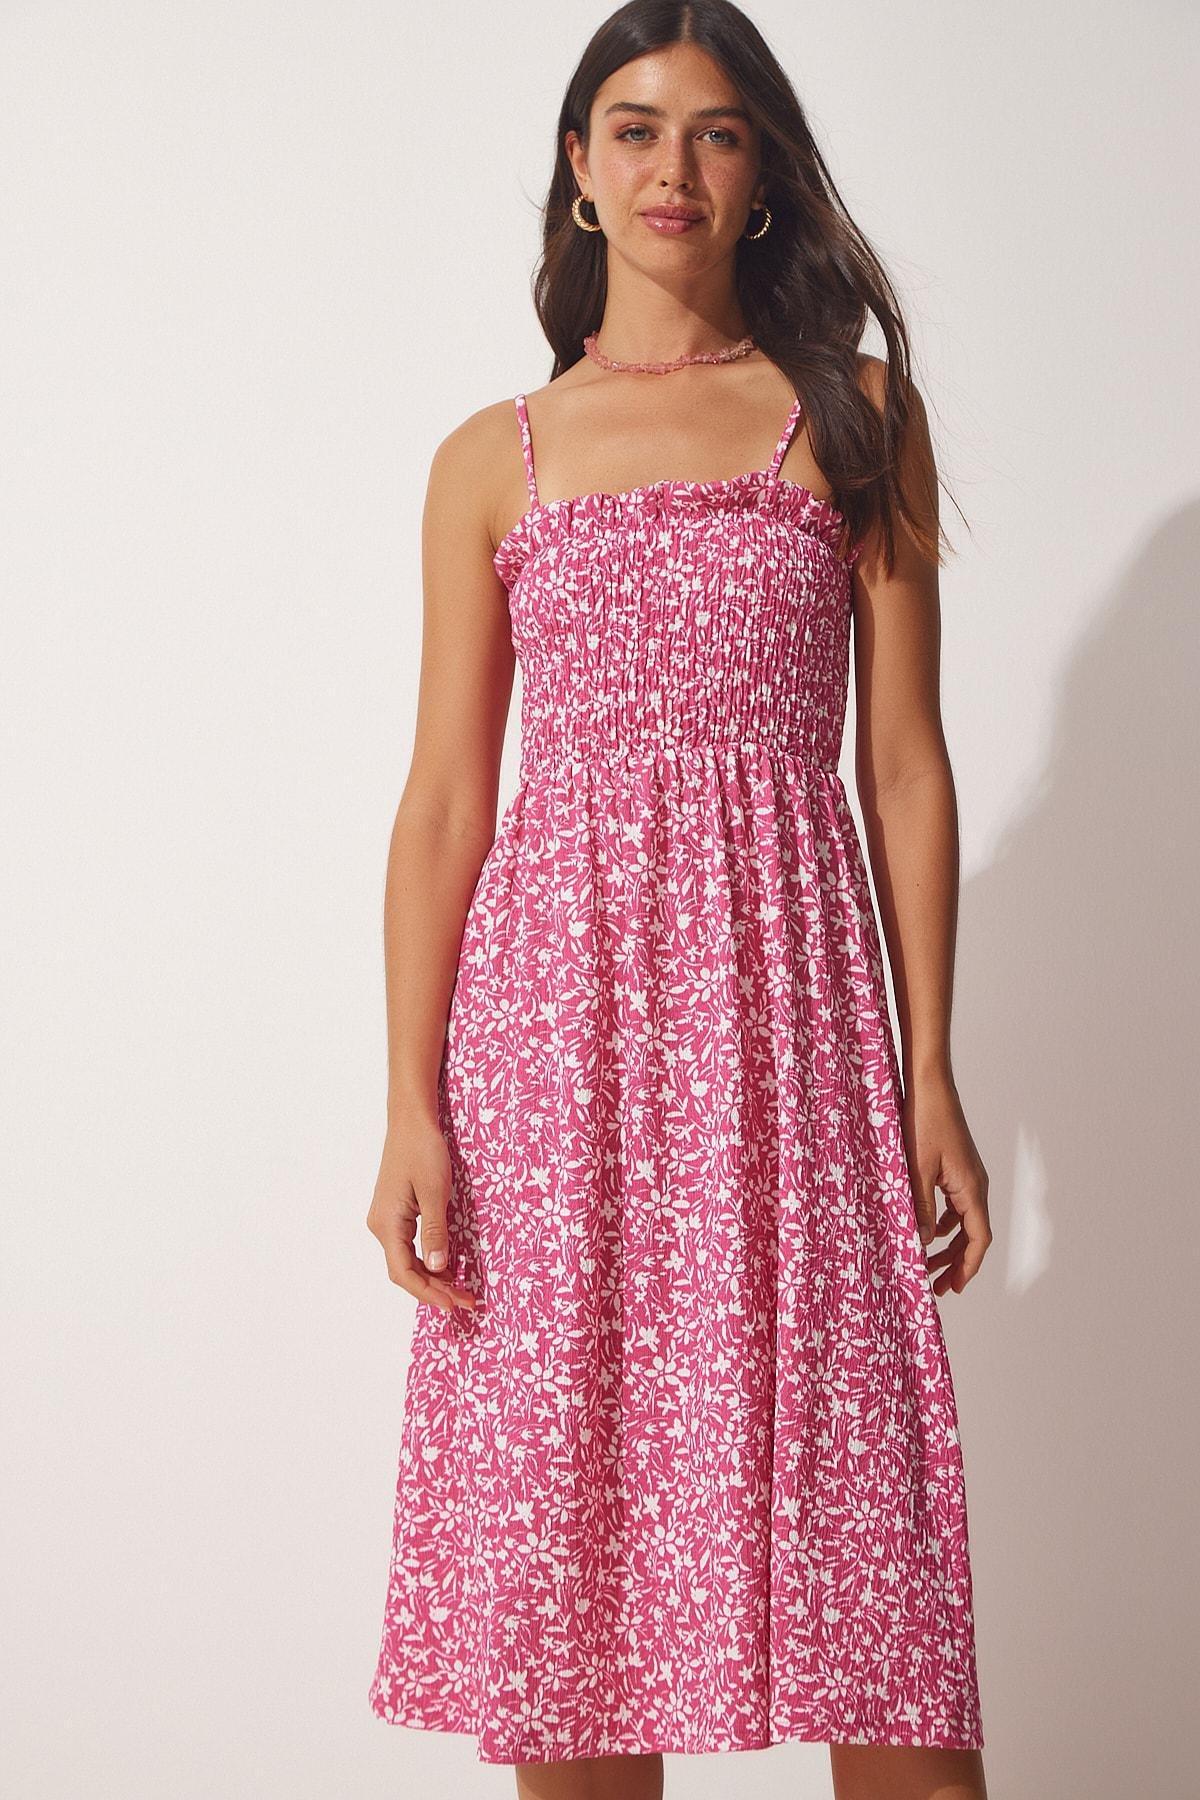 Happiness Istanbul - Pink Floral A-Line Dress